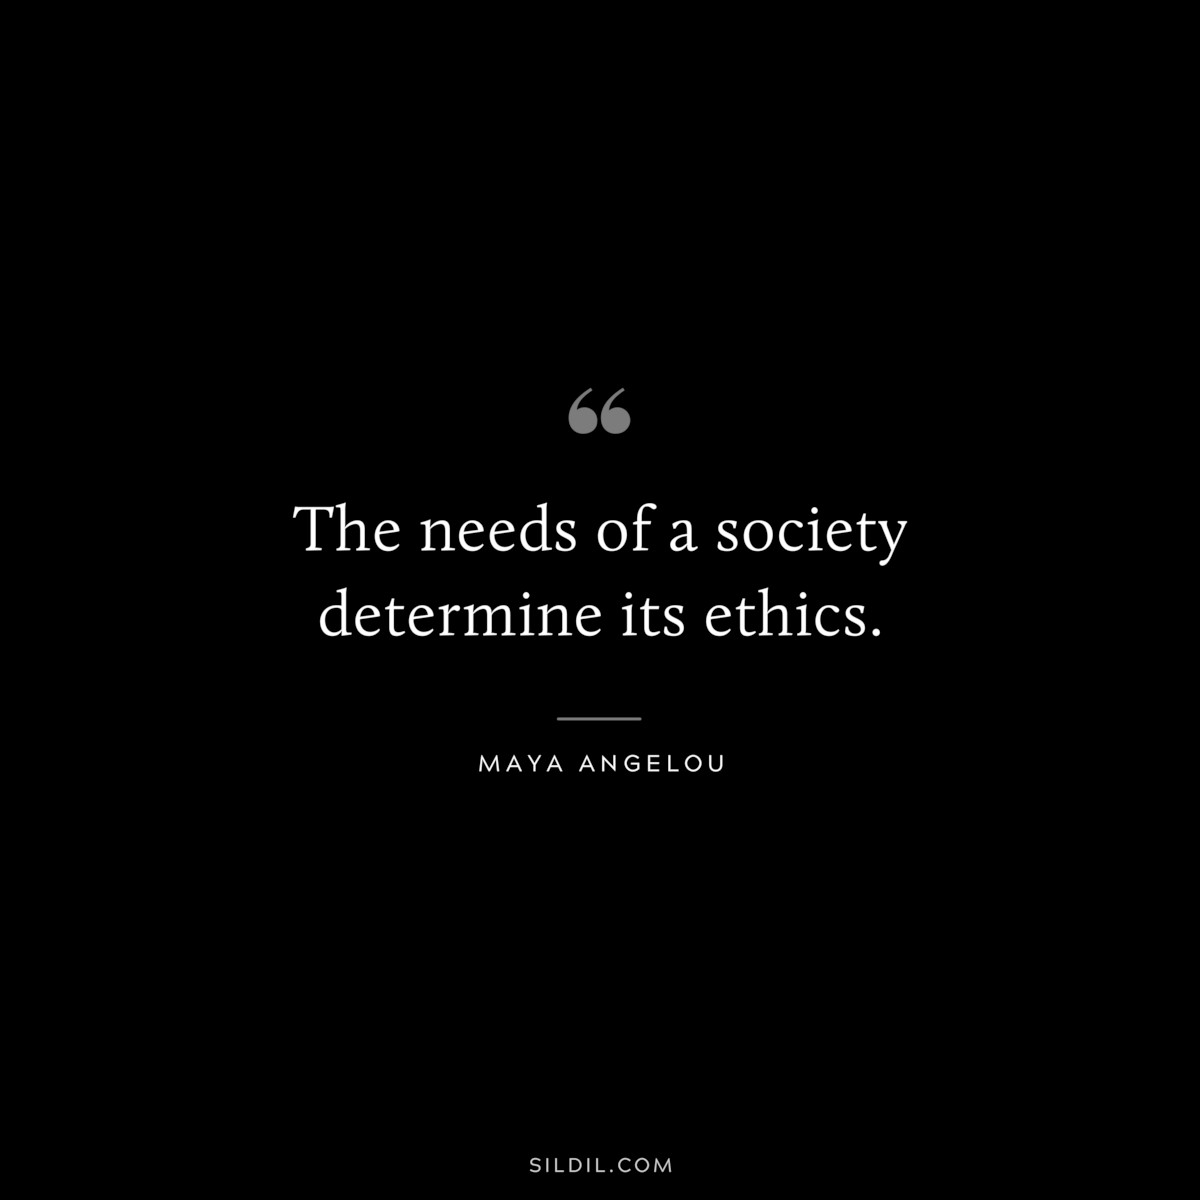 The needs of a society determine its ethics. ― Maya Angelou